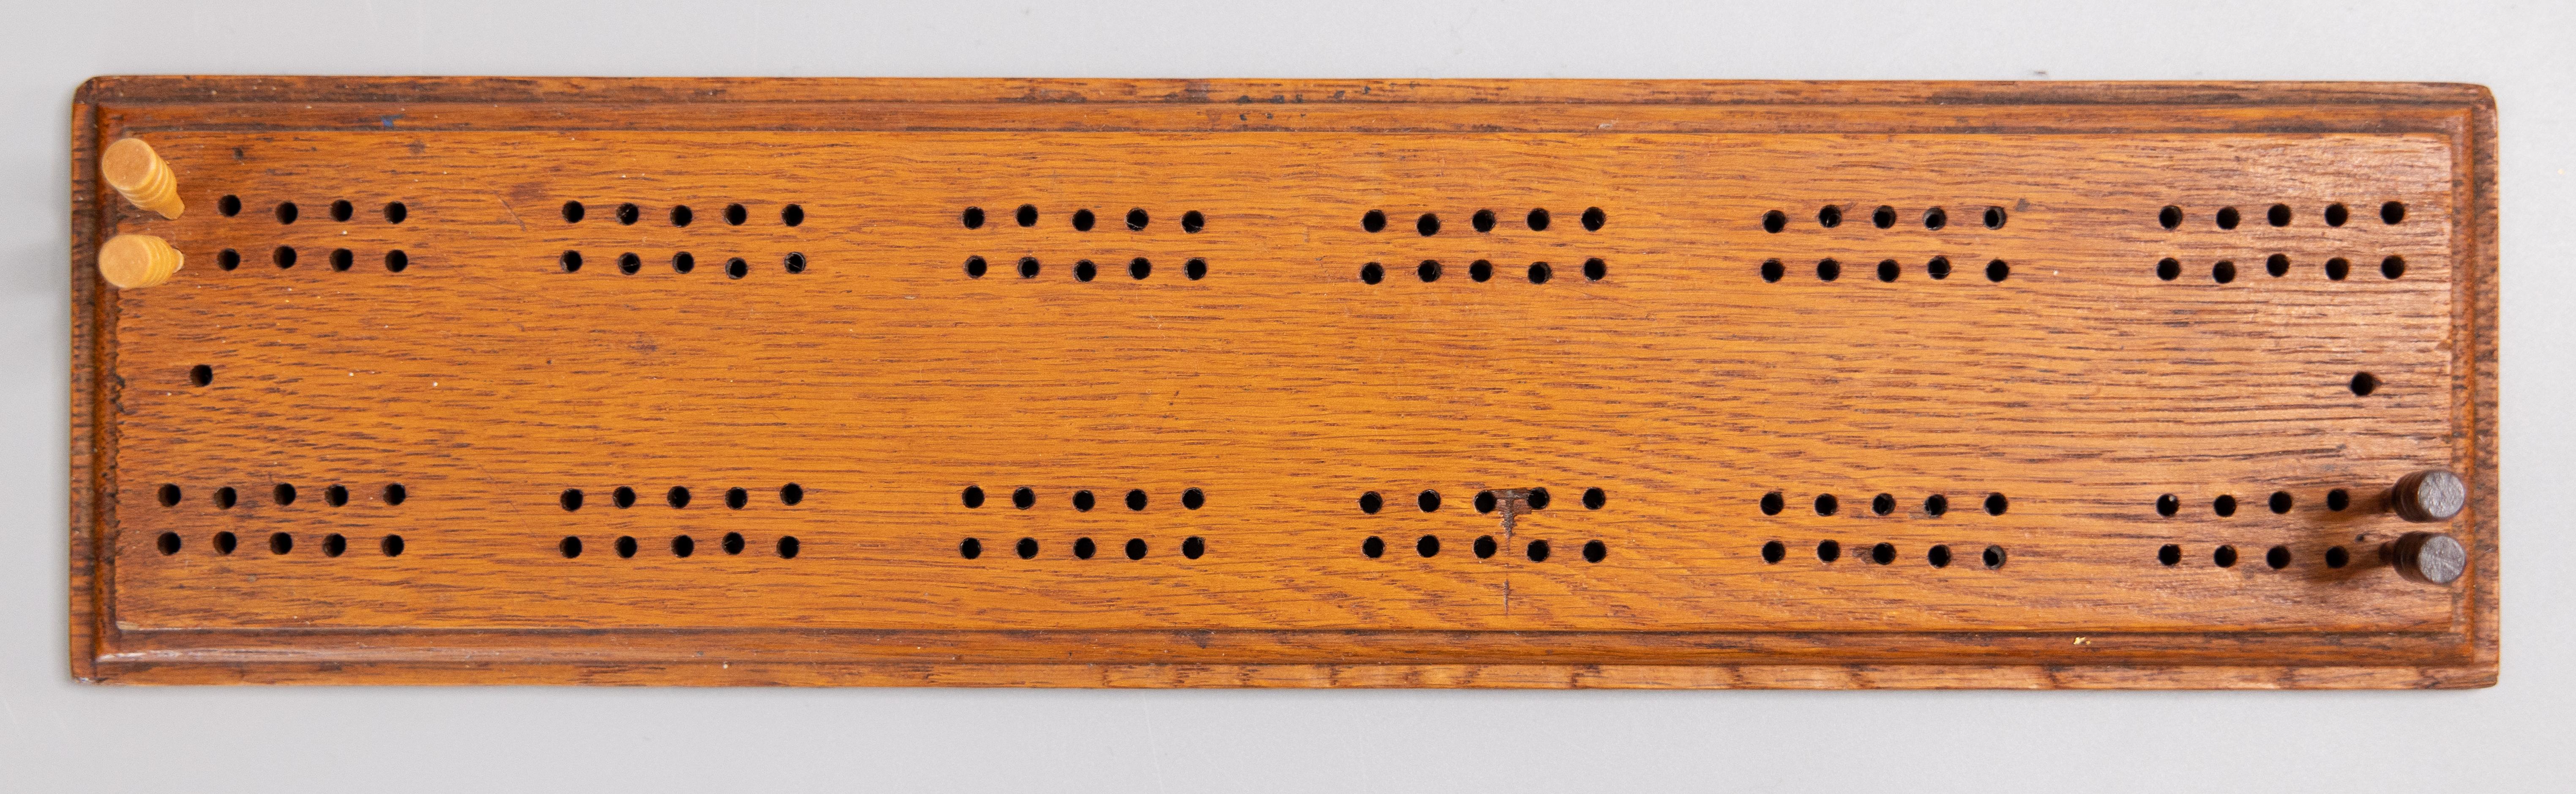 An early 20th Century handmade English cribbage oak game board with beveled edges and 4 pegs, circa 1910. Maker's mark on reverse. It would make a wonderful gift!

DIMENSIONS
12.5ʺW × 3.2ʺD × 0.5ʺH